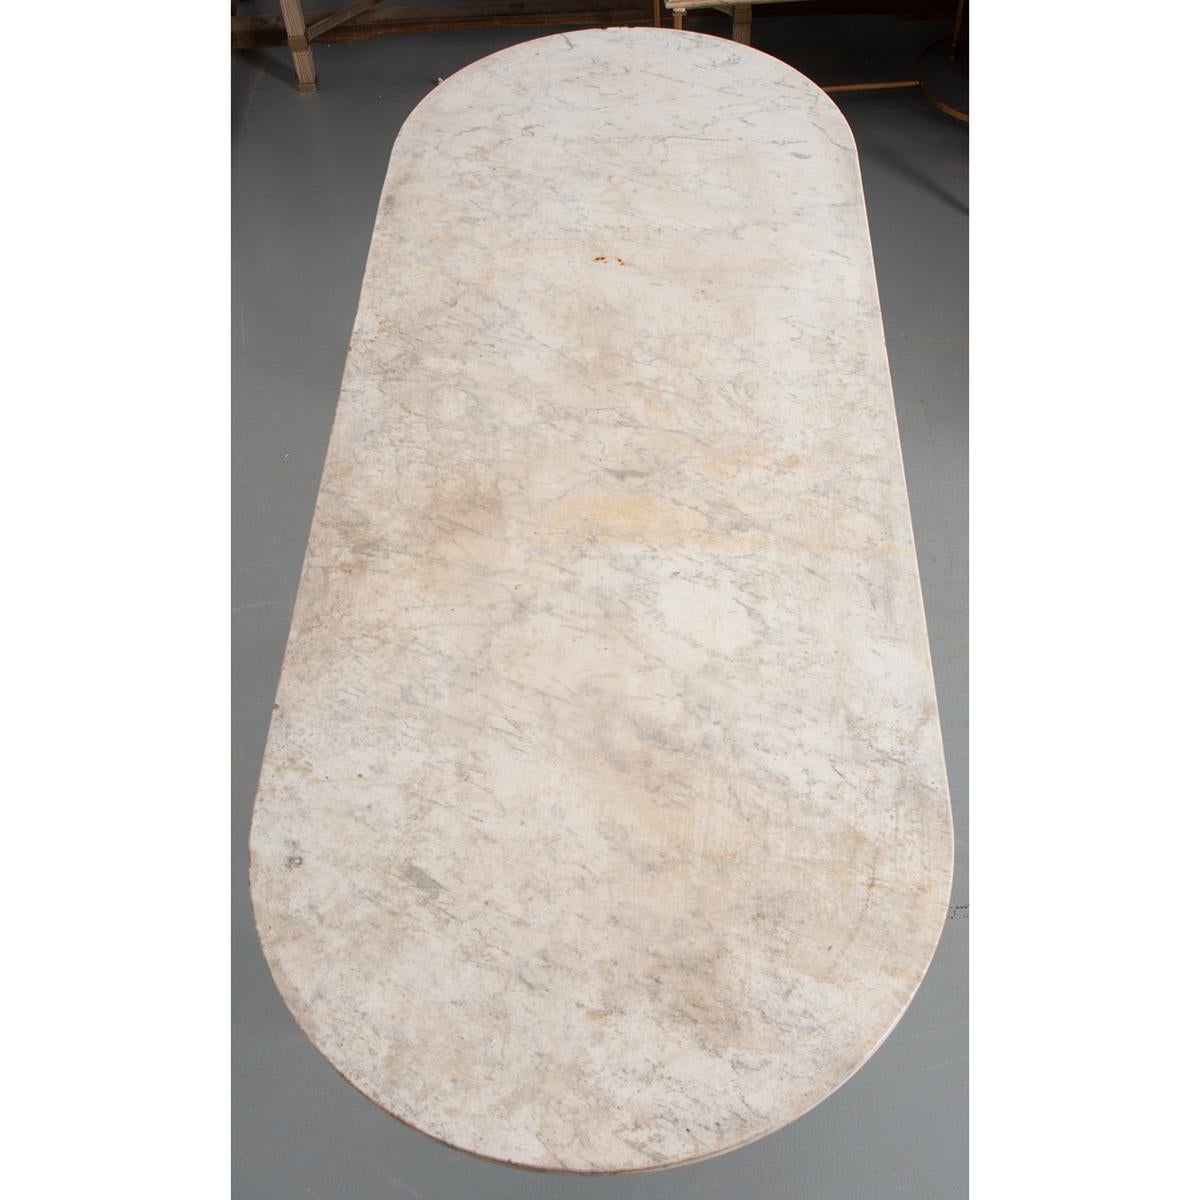 A classically styled, French bistro table. The table features a white capsule-shaped marble top resting on a cast iron base with X-form stretcher and more recent light blue paint. This piece shows some wear from being outside and it seats six